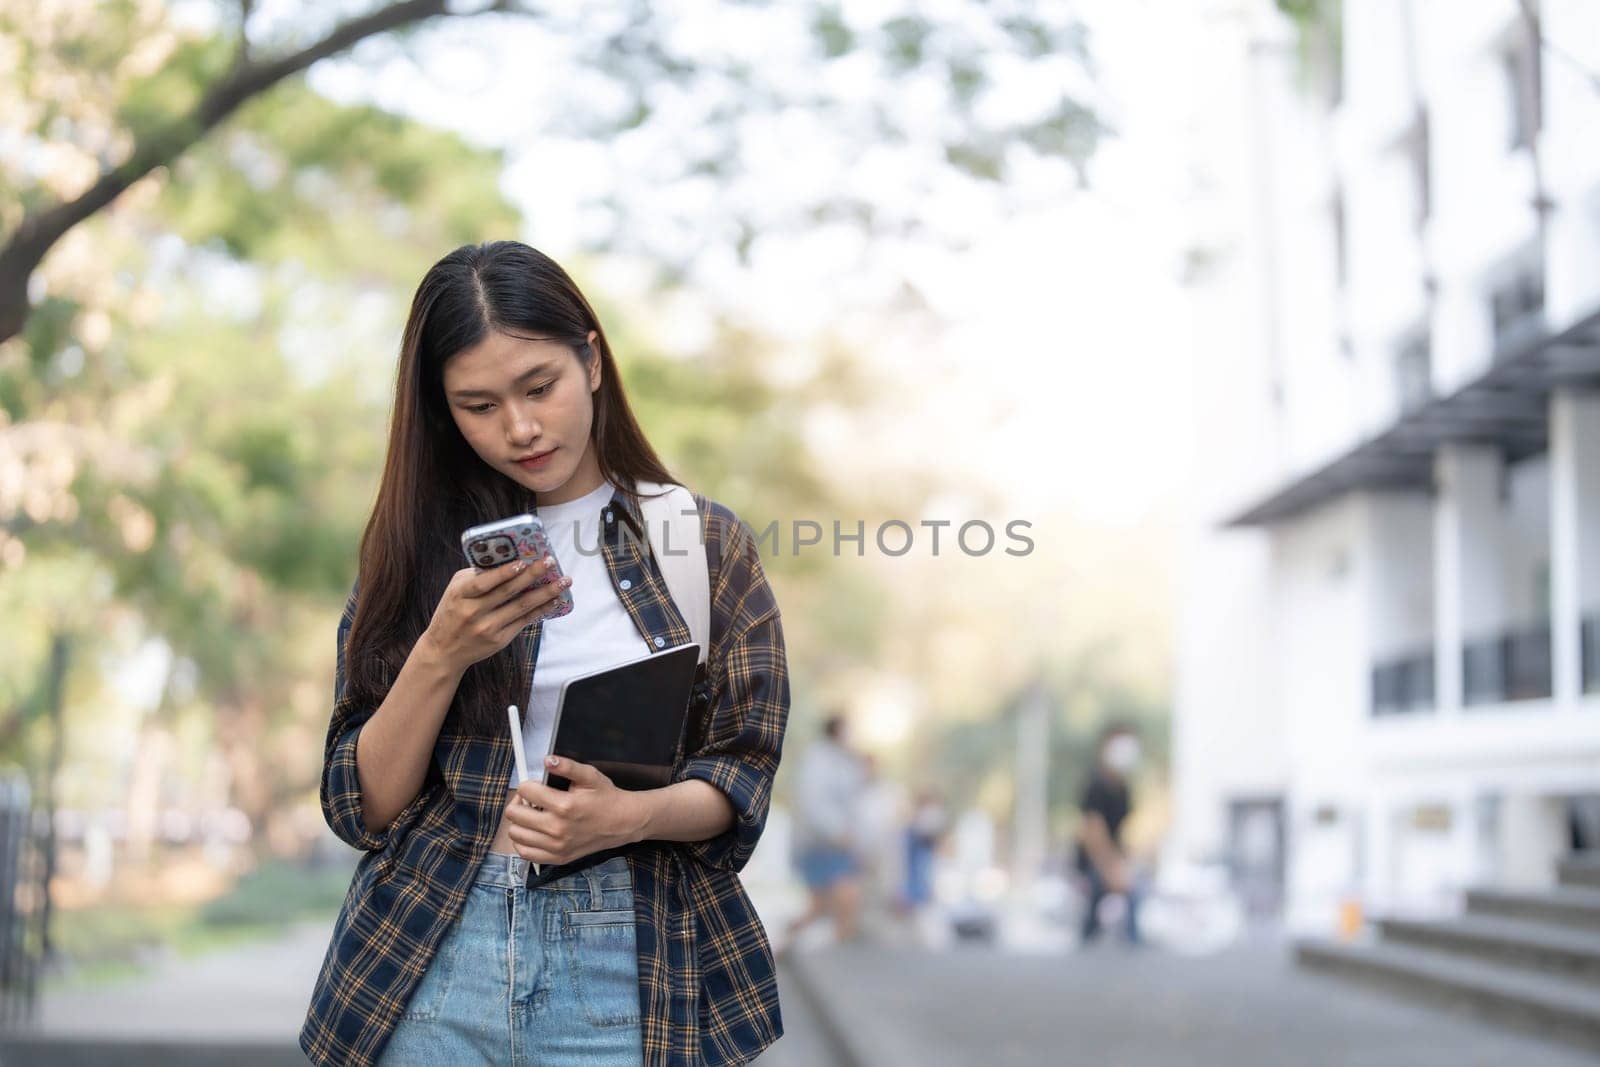 Female college students happily holding laptops outdoors after school on campus. when the sun goes down the horizon with warm light..